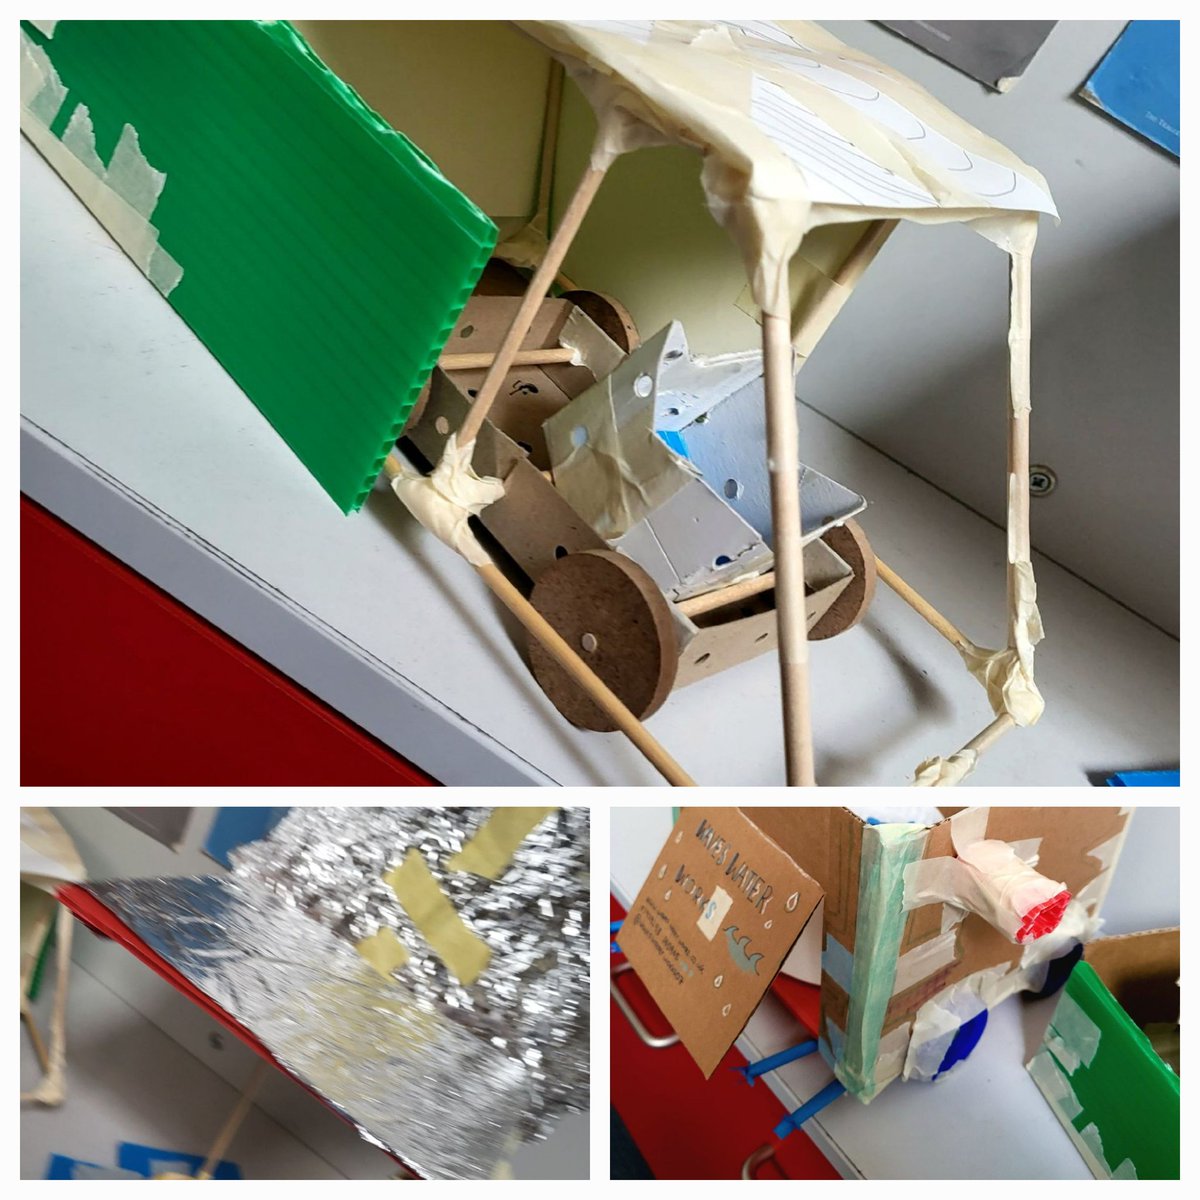 Looking forward to day 4 of our #STEM events as part of #activitiesweek @CDPStoday  Great work from the (new) year 8 students with their #SustainableSolutions . Remember you can claim your @CRESTAwards #DiscoveryAward #CreativeThinking #Teamwork